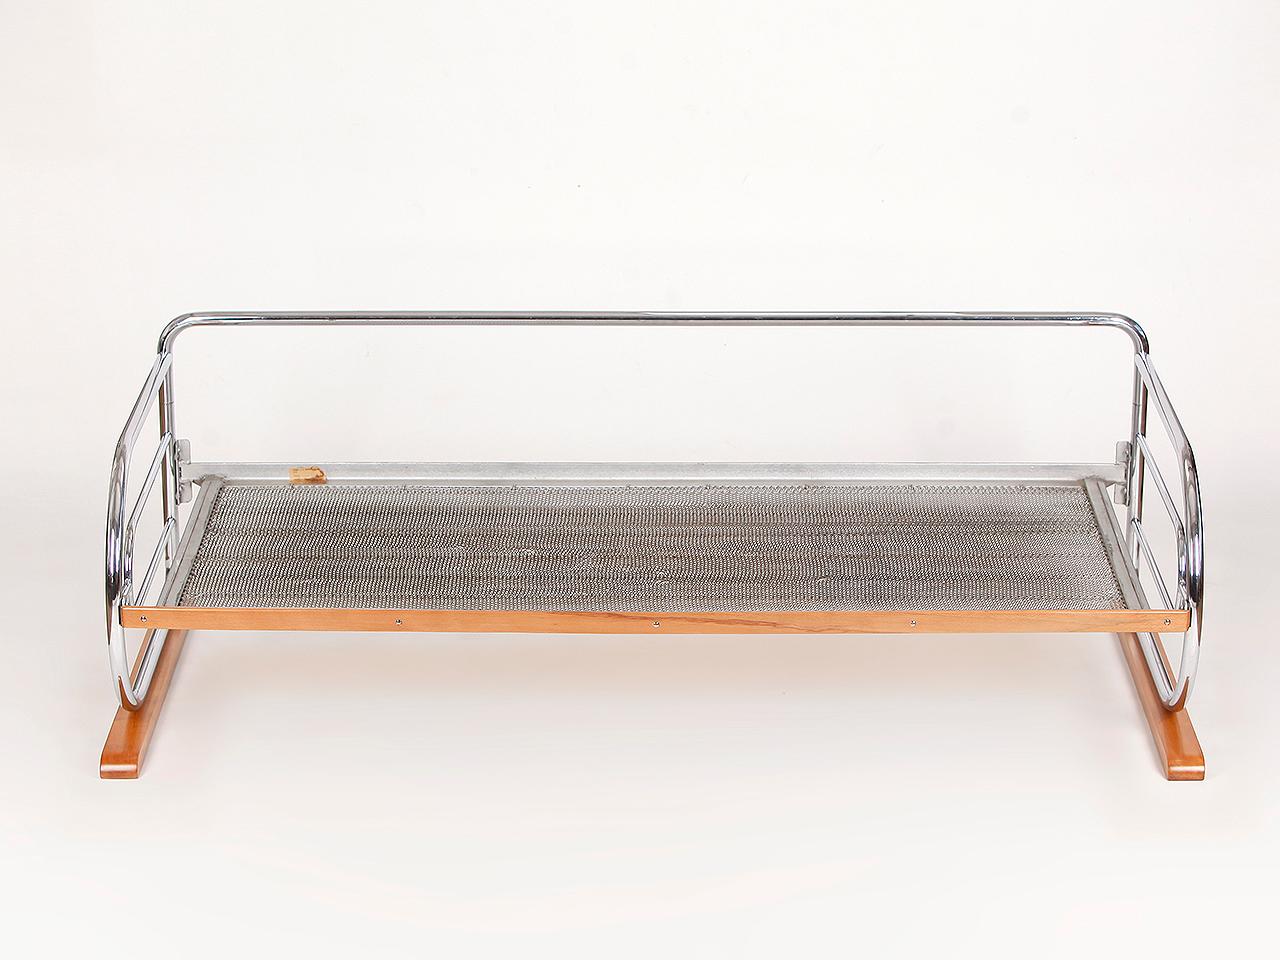 Chrome Art Deco Tubular Steel Couch Daybed from H. Gottwald, 1930s